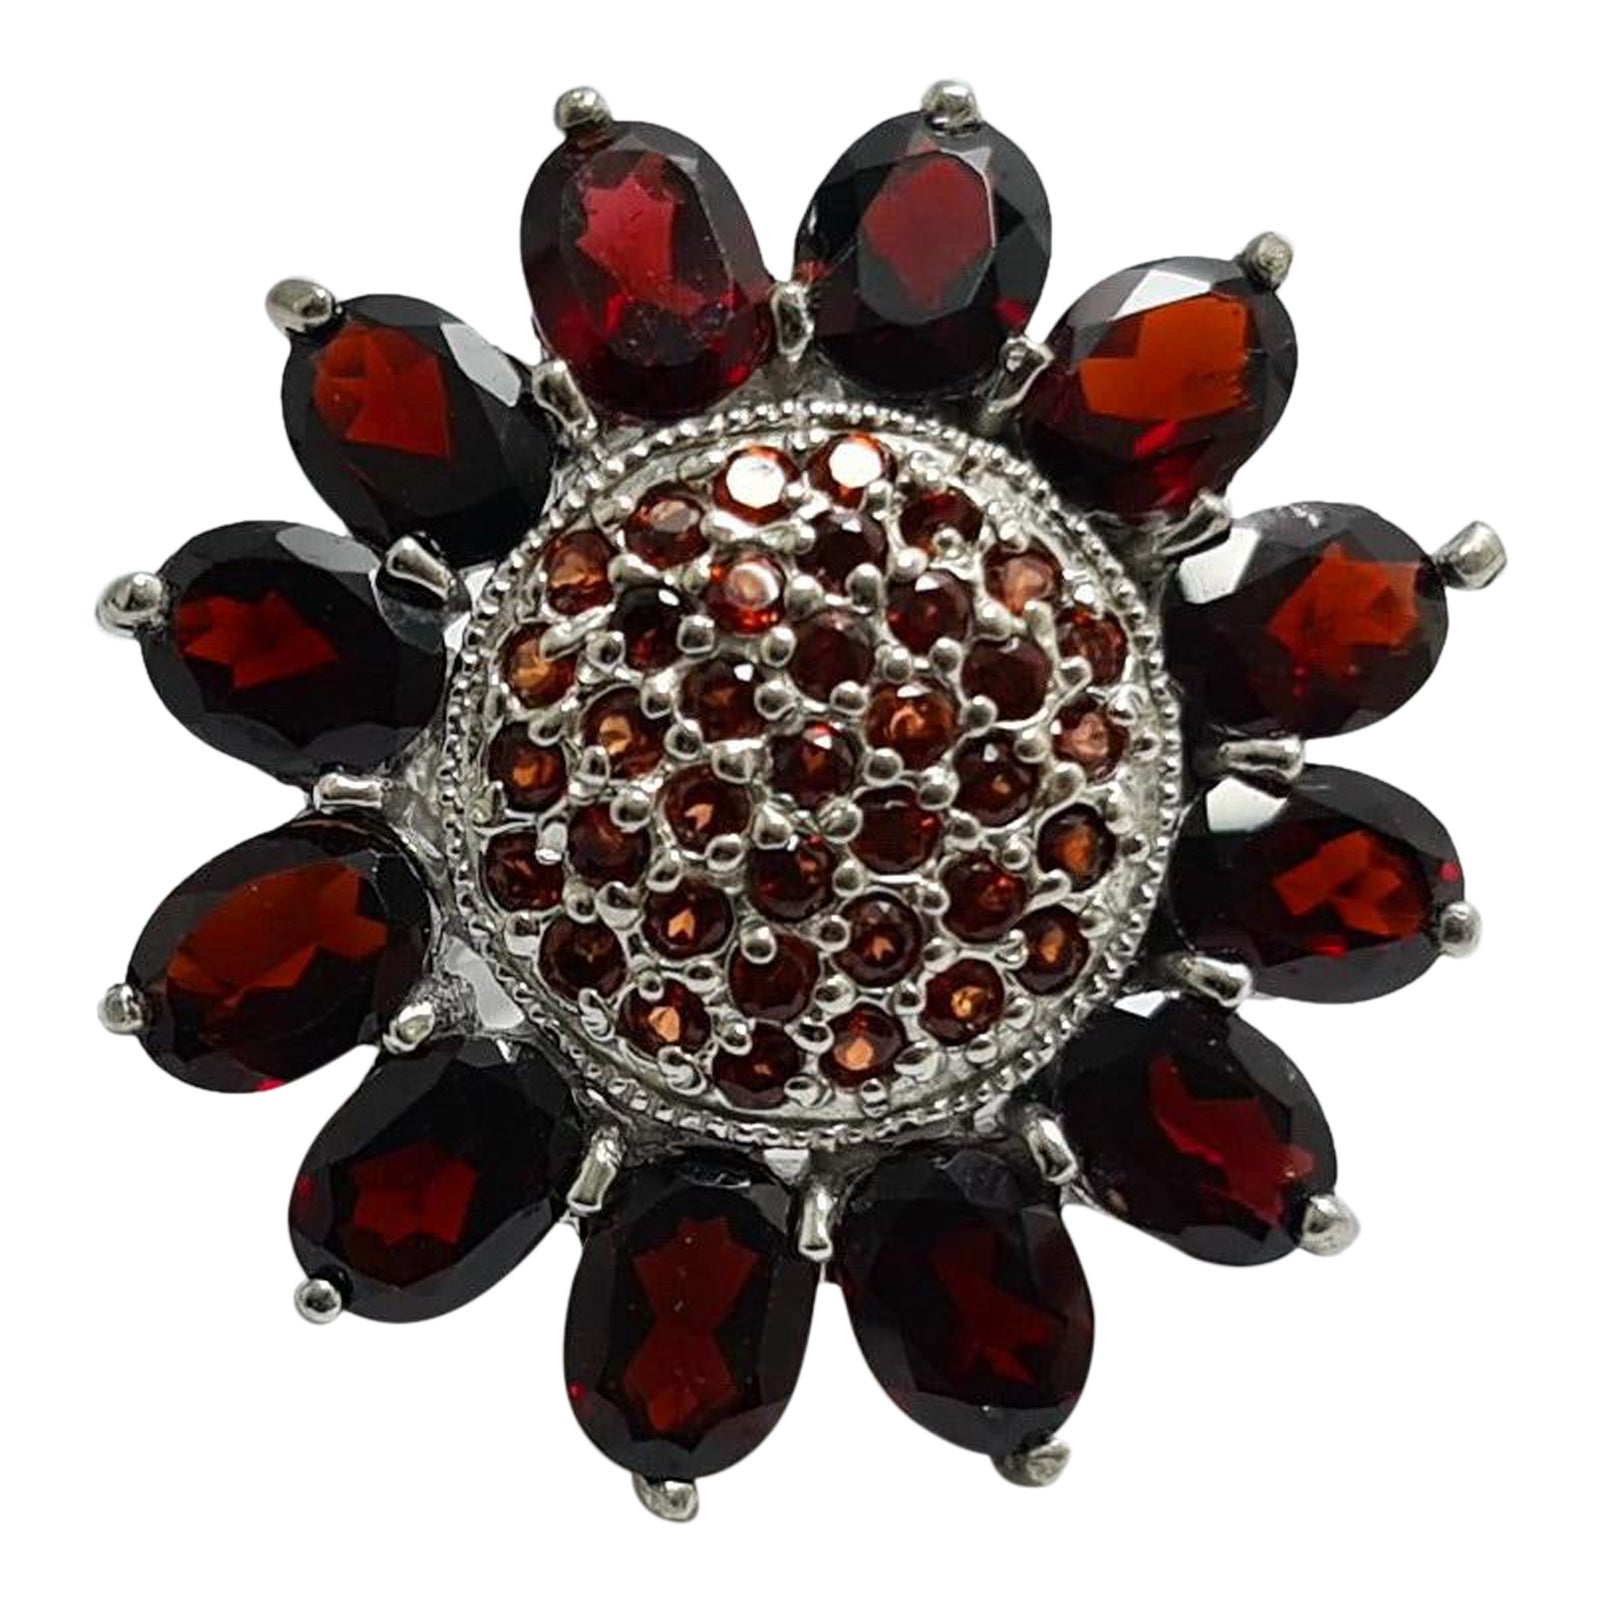 Natural Untreated Brazilian Deep Red Garnet Sterling Silver Rhodium Plated Sunflower Ring

Total weight of the ring: 17 grams
Total weight of Garnet: 13 carats

Please see other listings for matching sets